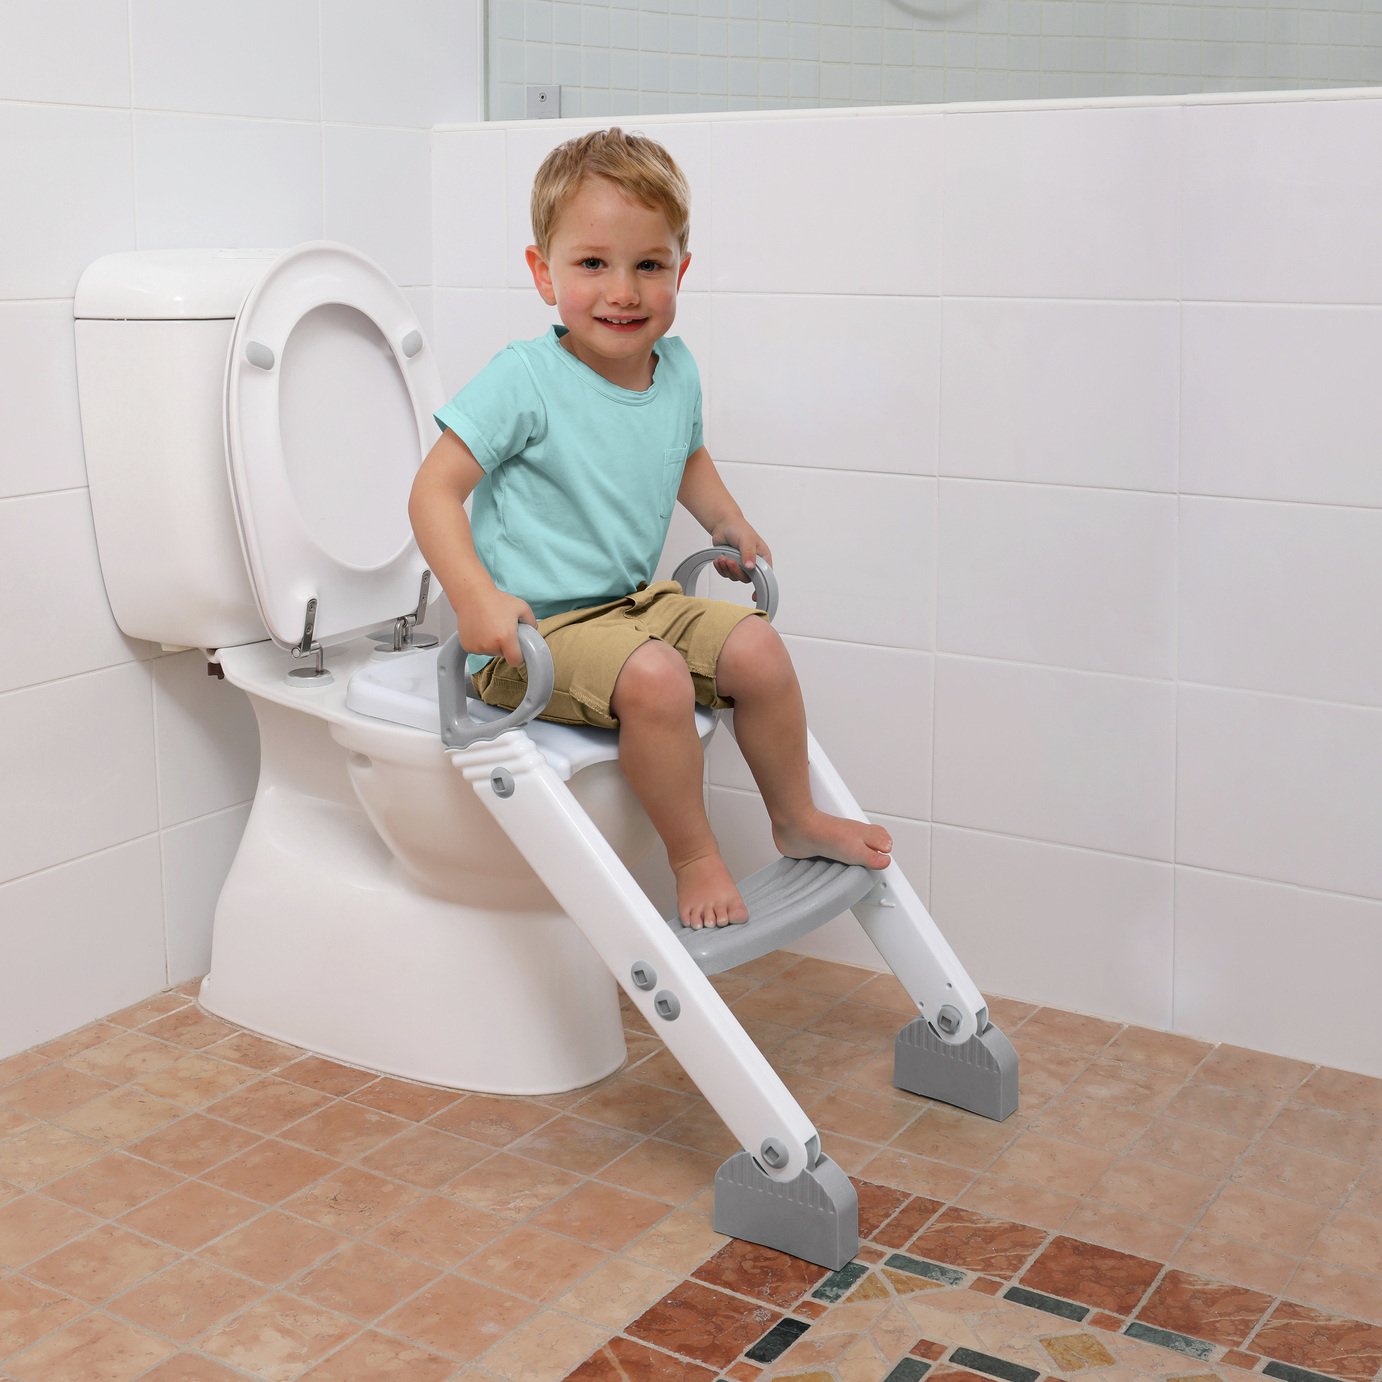 Dreambaby Step-Up Toilet Trainer Review